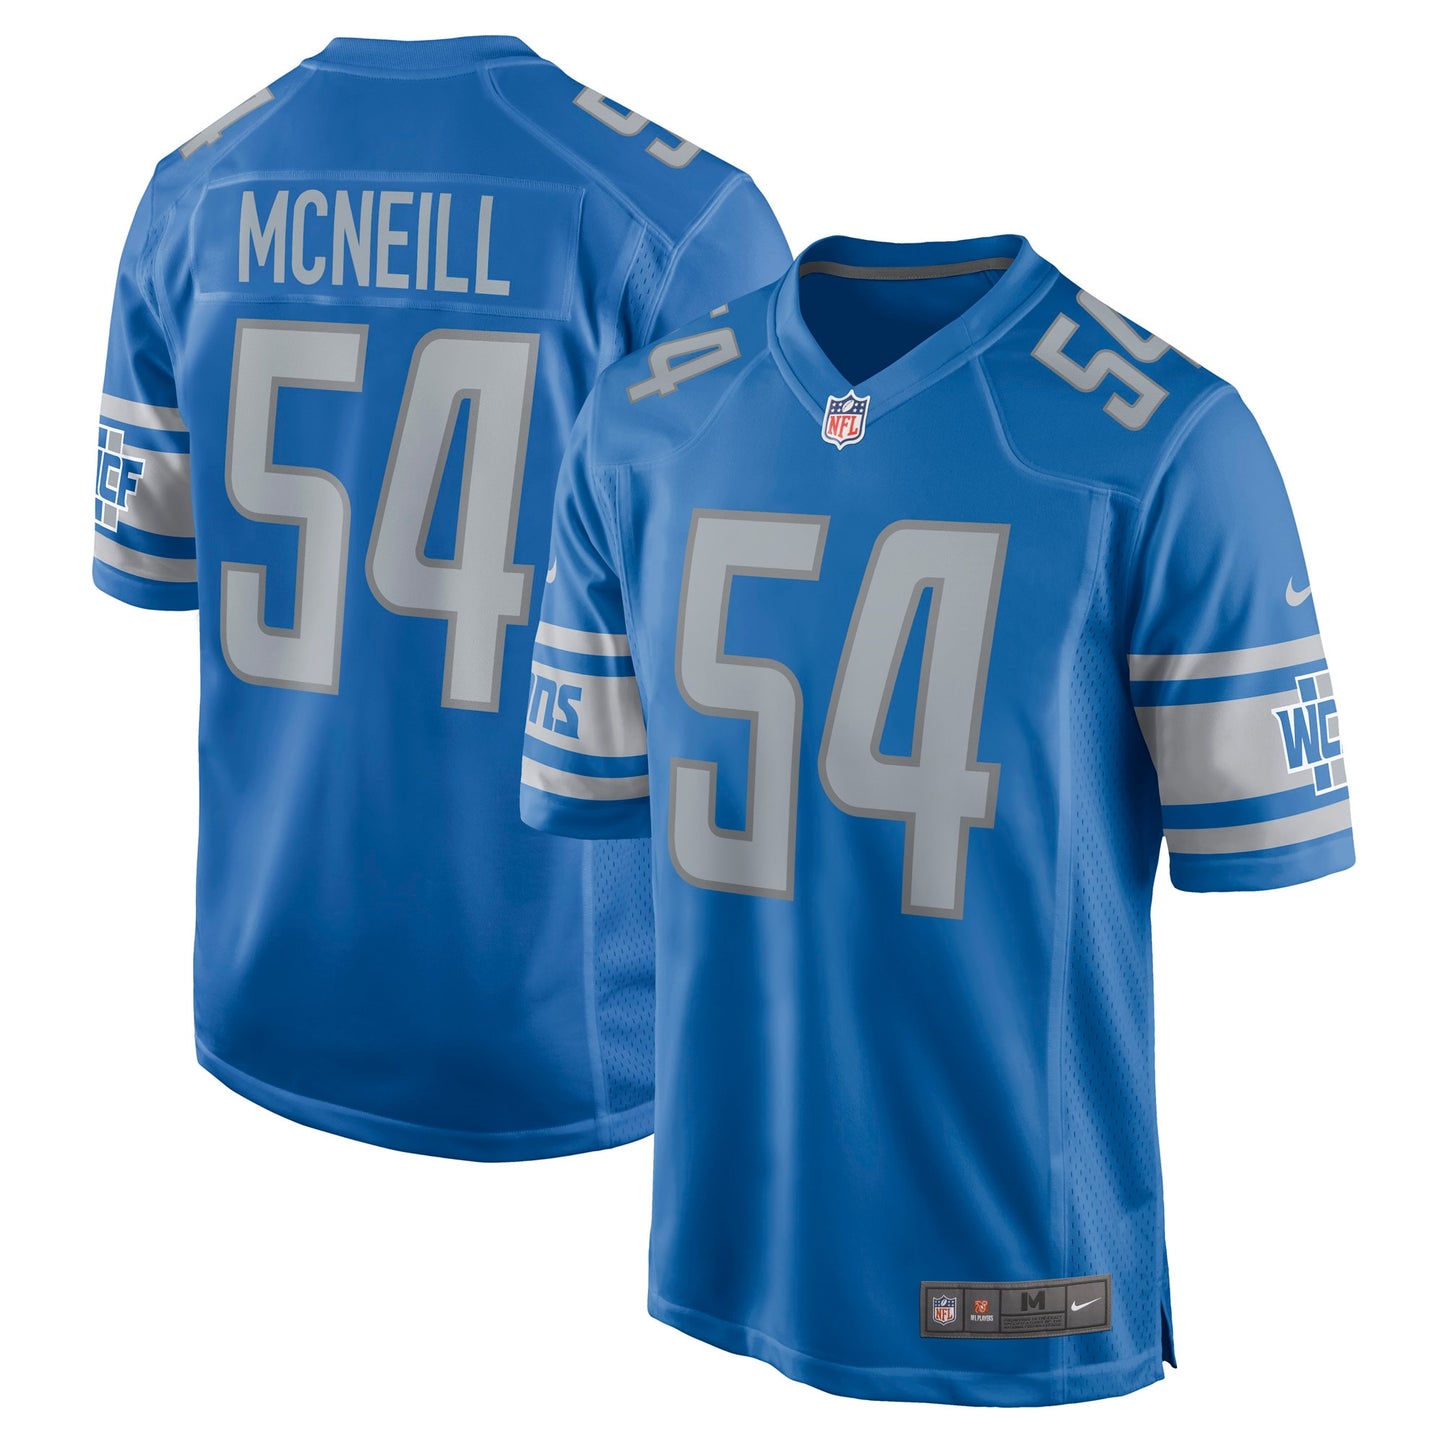 Alim McNeill Detroit Lions Nike Game Jersey - Blue